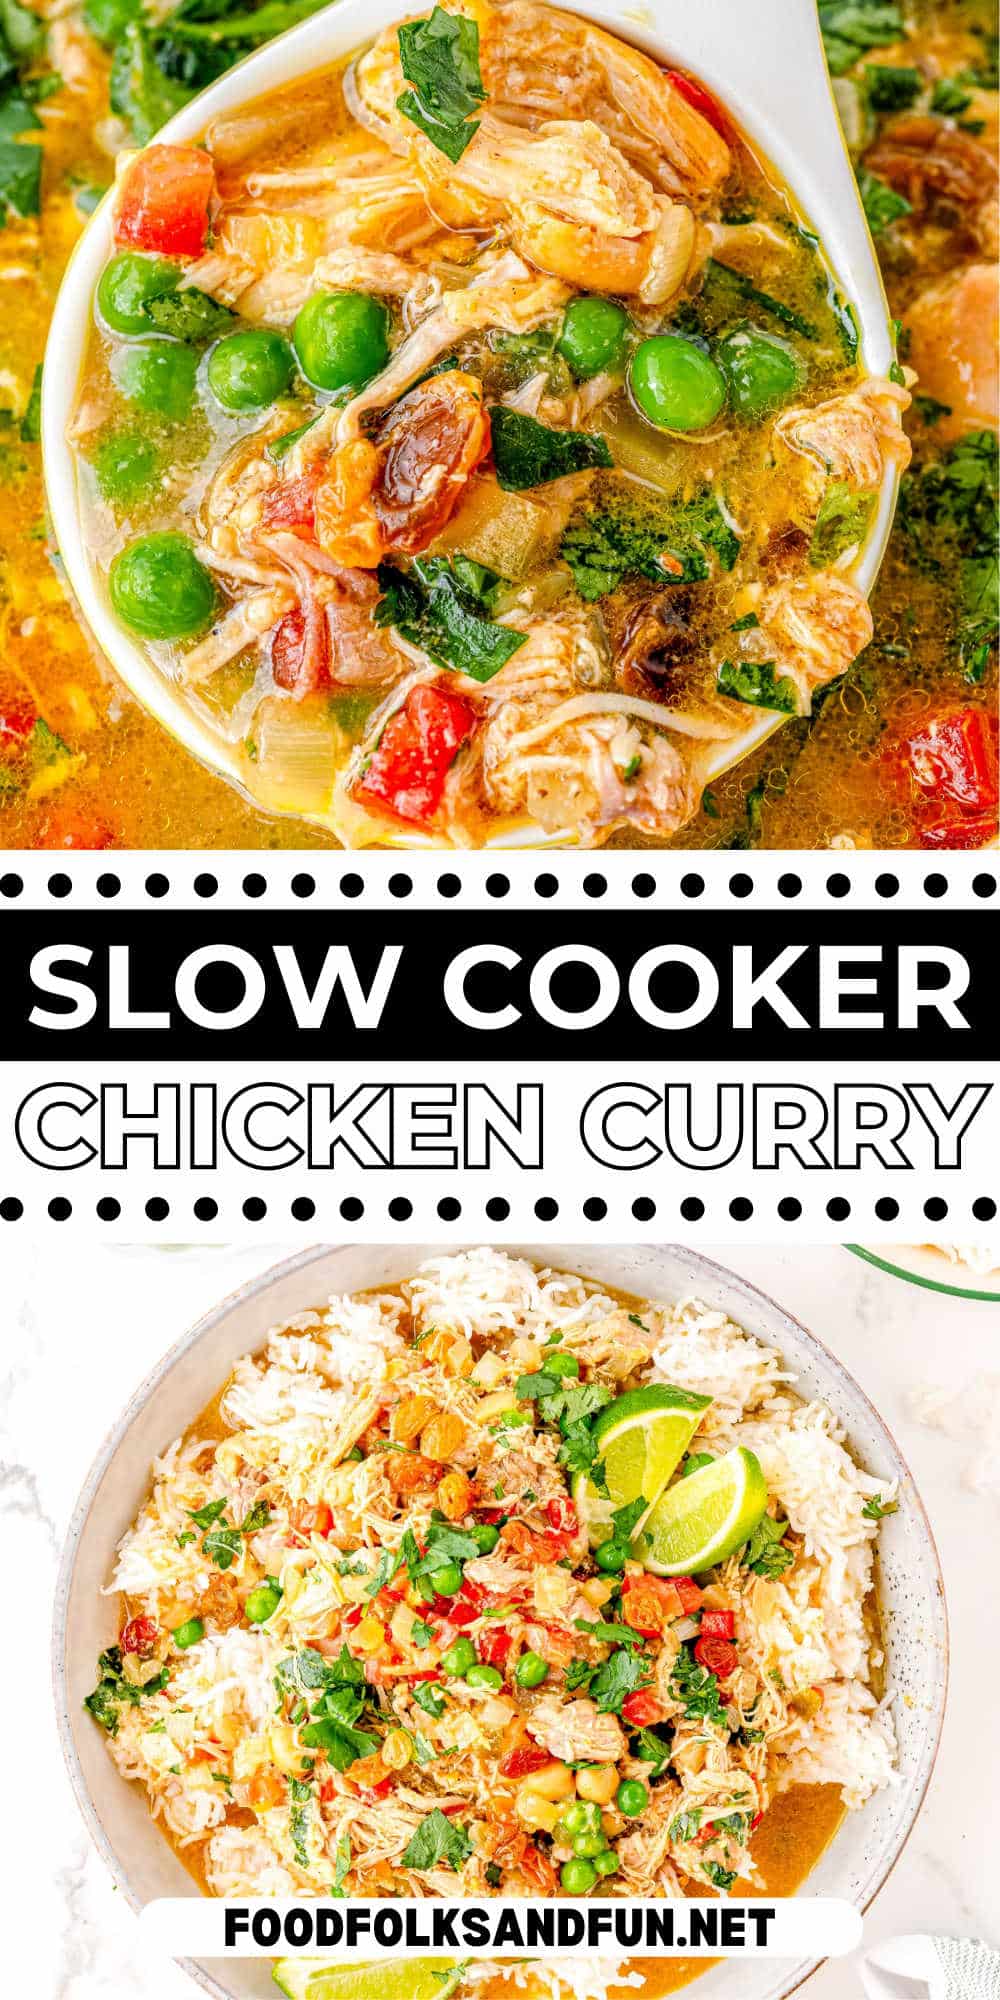 Skip the takeout! Your beloved chicken curry just got a magical makeover: slow cooker edition! Effortless prep, flavor explosion, and leftovers that sing. via @foodfolksandfun